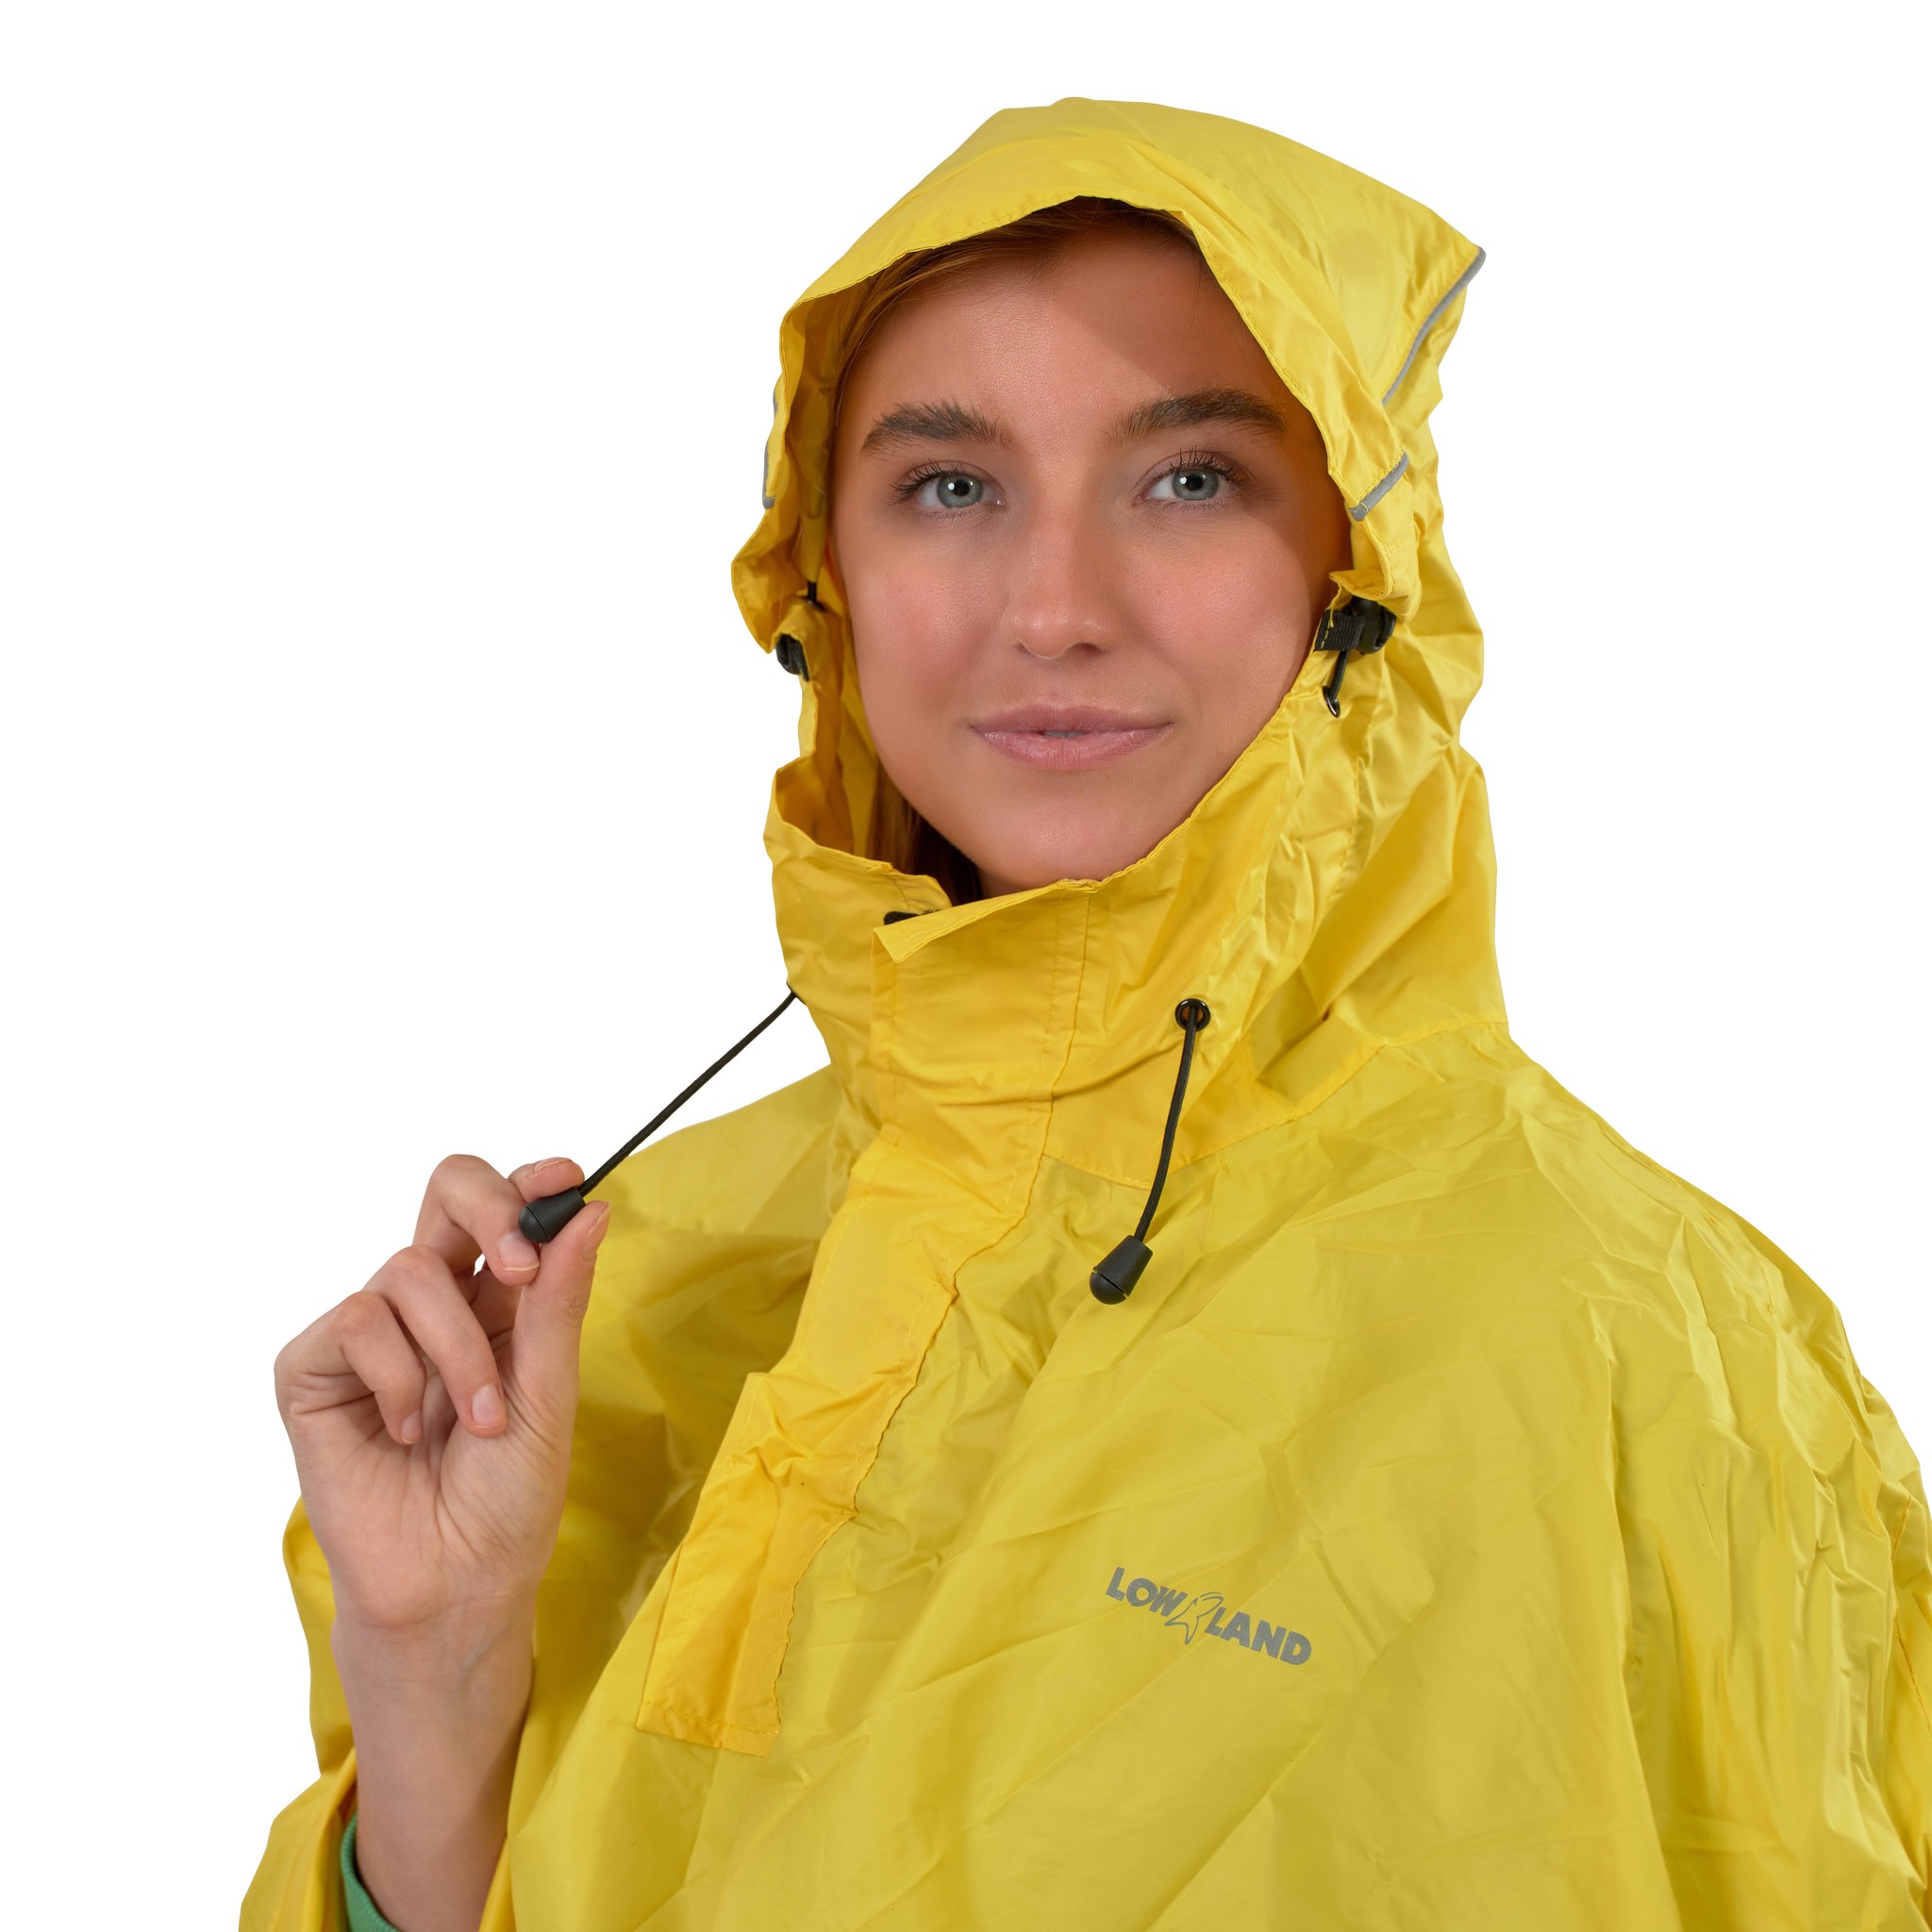 PONCHO IMPERMEABLE 1.45 X 2 MTS AMARILLO REF. 1484